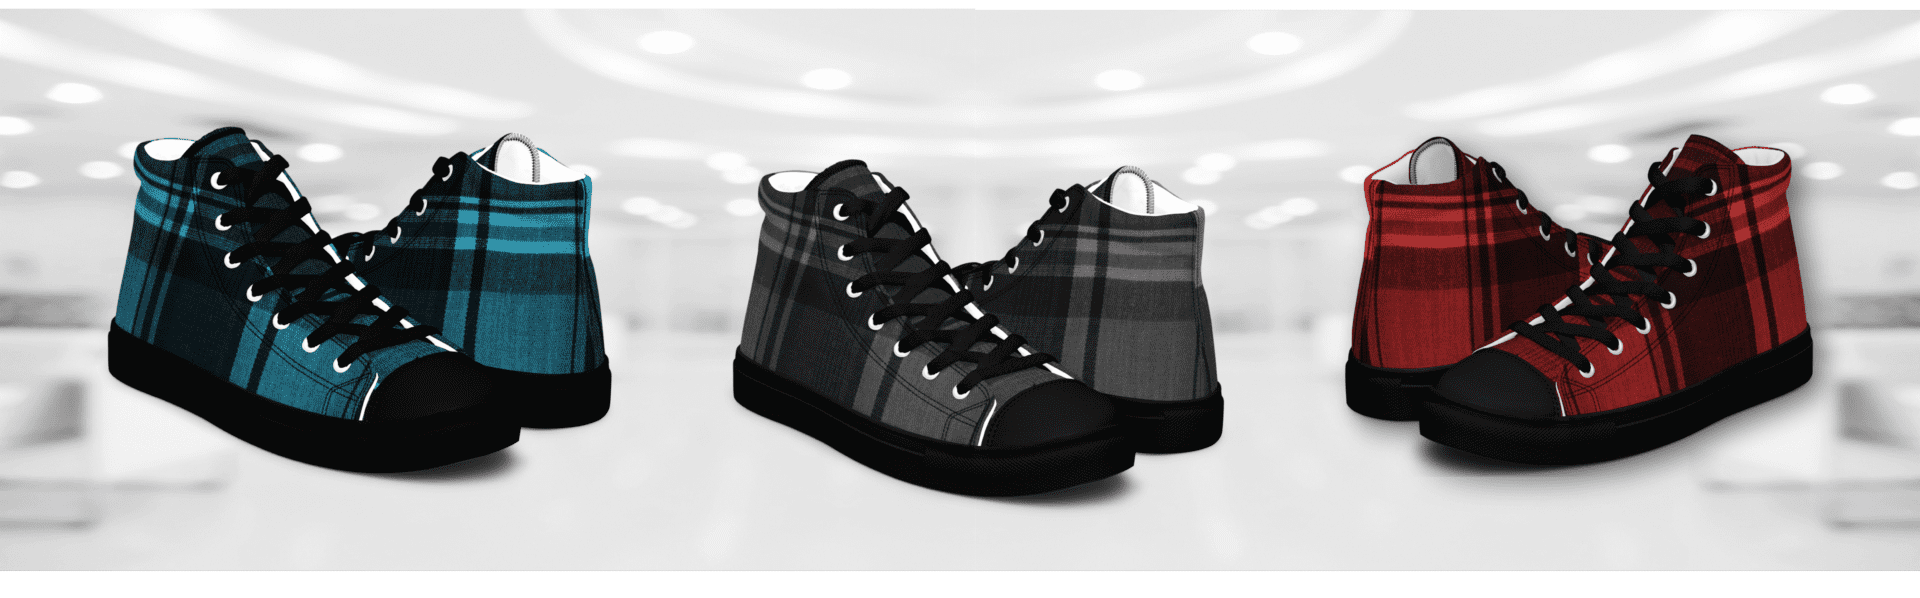 Three pairs of plaid high top sneakers.